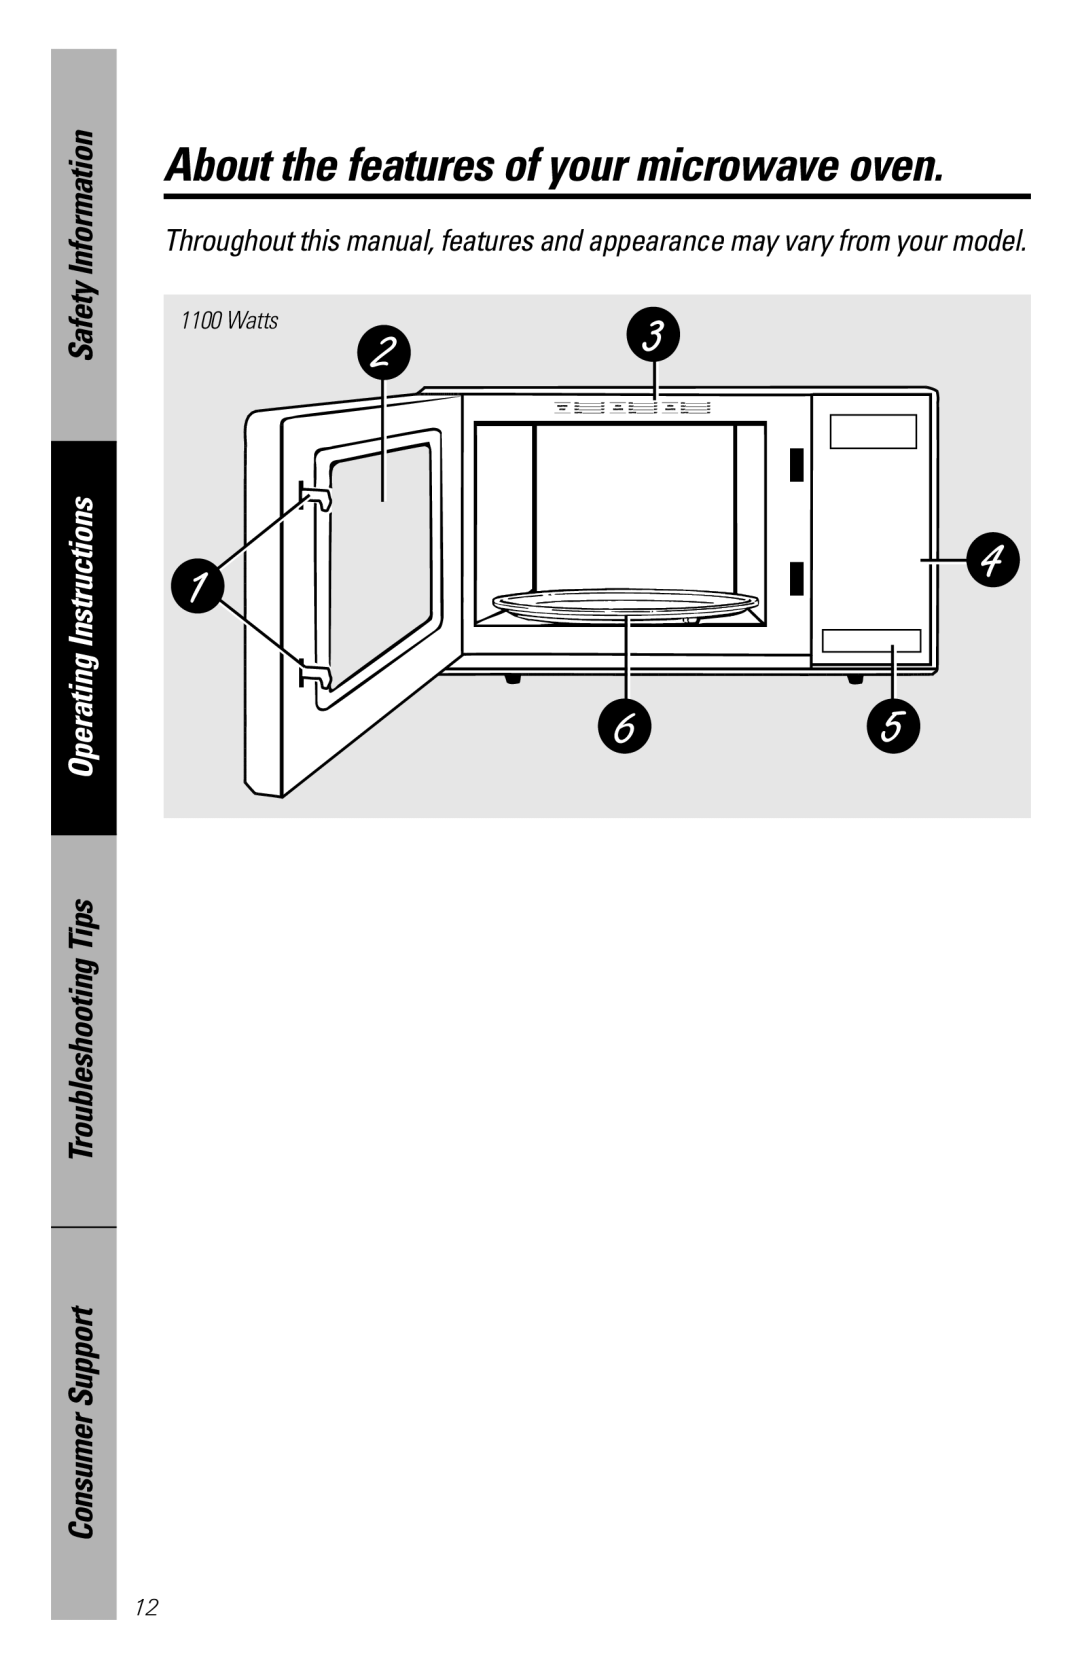 GE JES1039 owner manual About the features of your microwave oven, Safety Information, Operating Instructions 